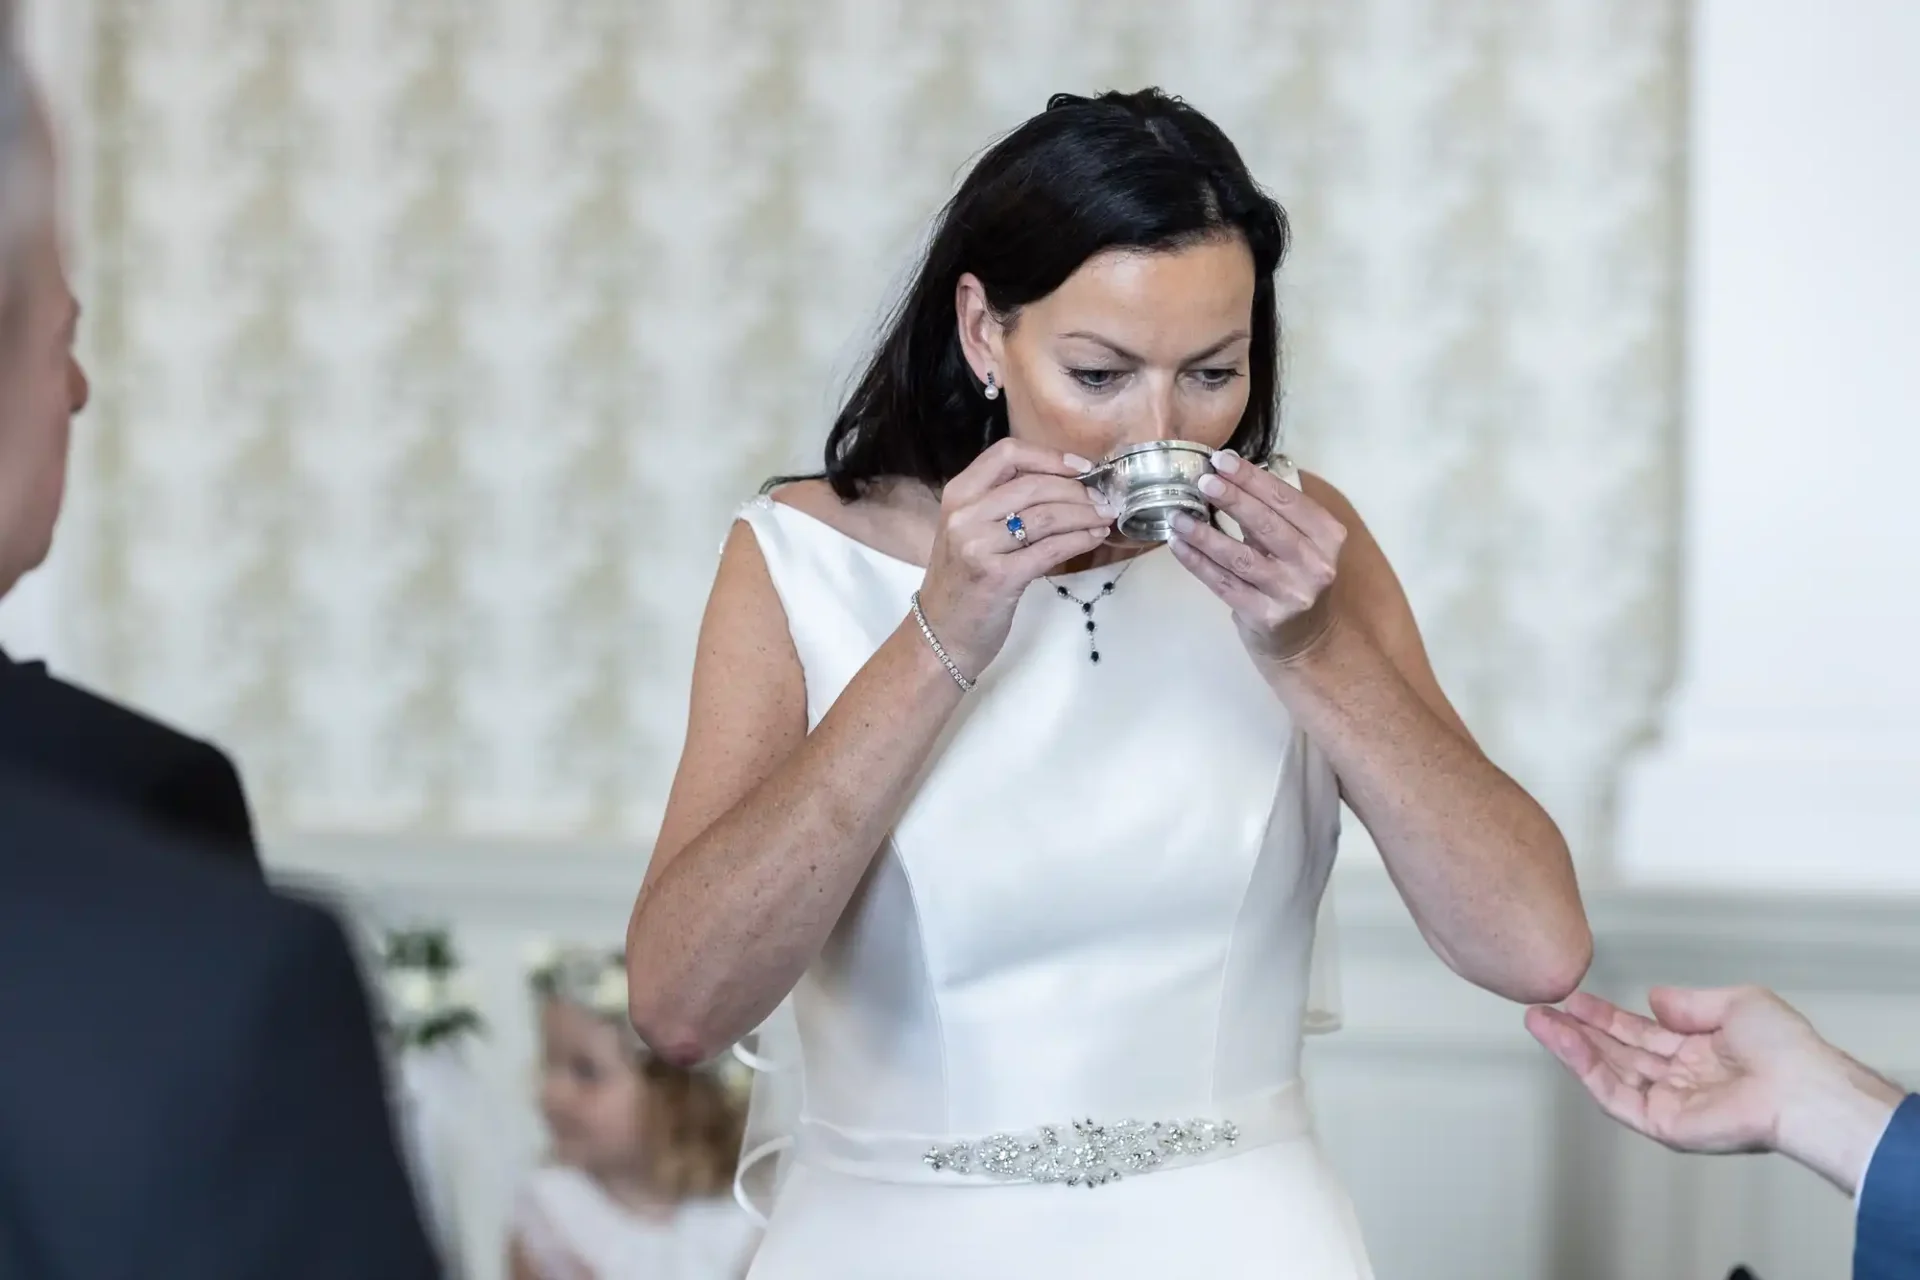 A bride in a white dress sipping from a small silver cup during a wedding ceremony, with a blurred background showing a young girl.